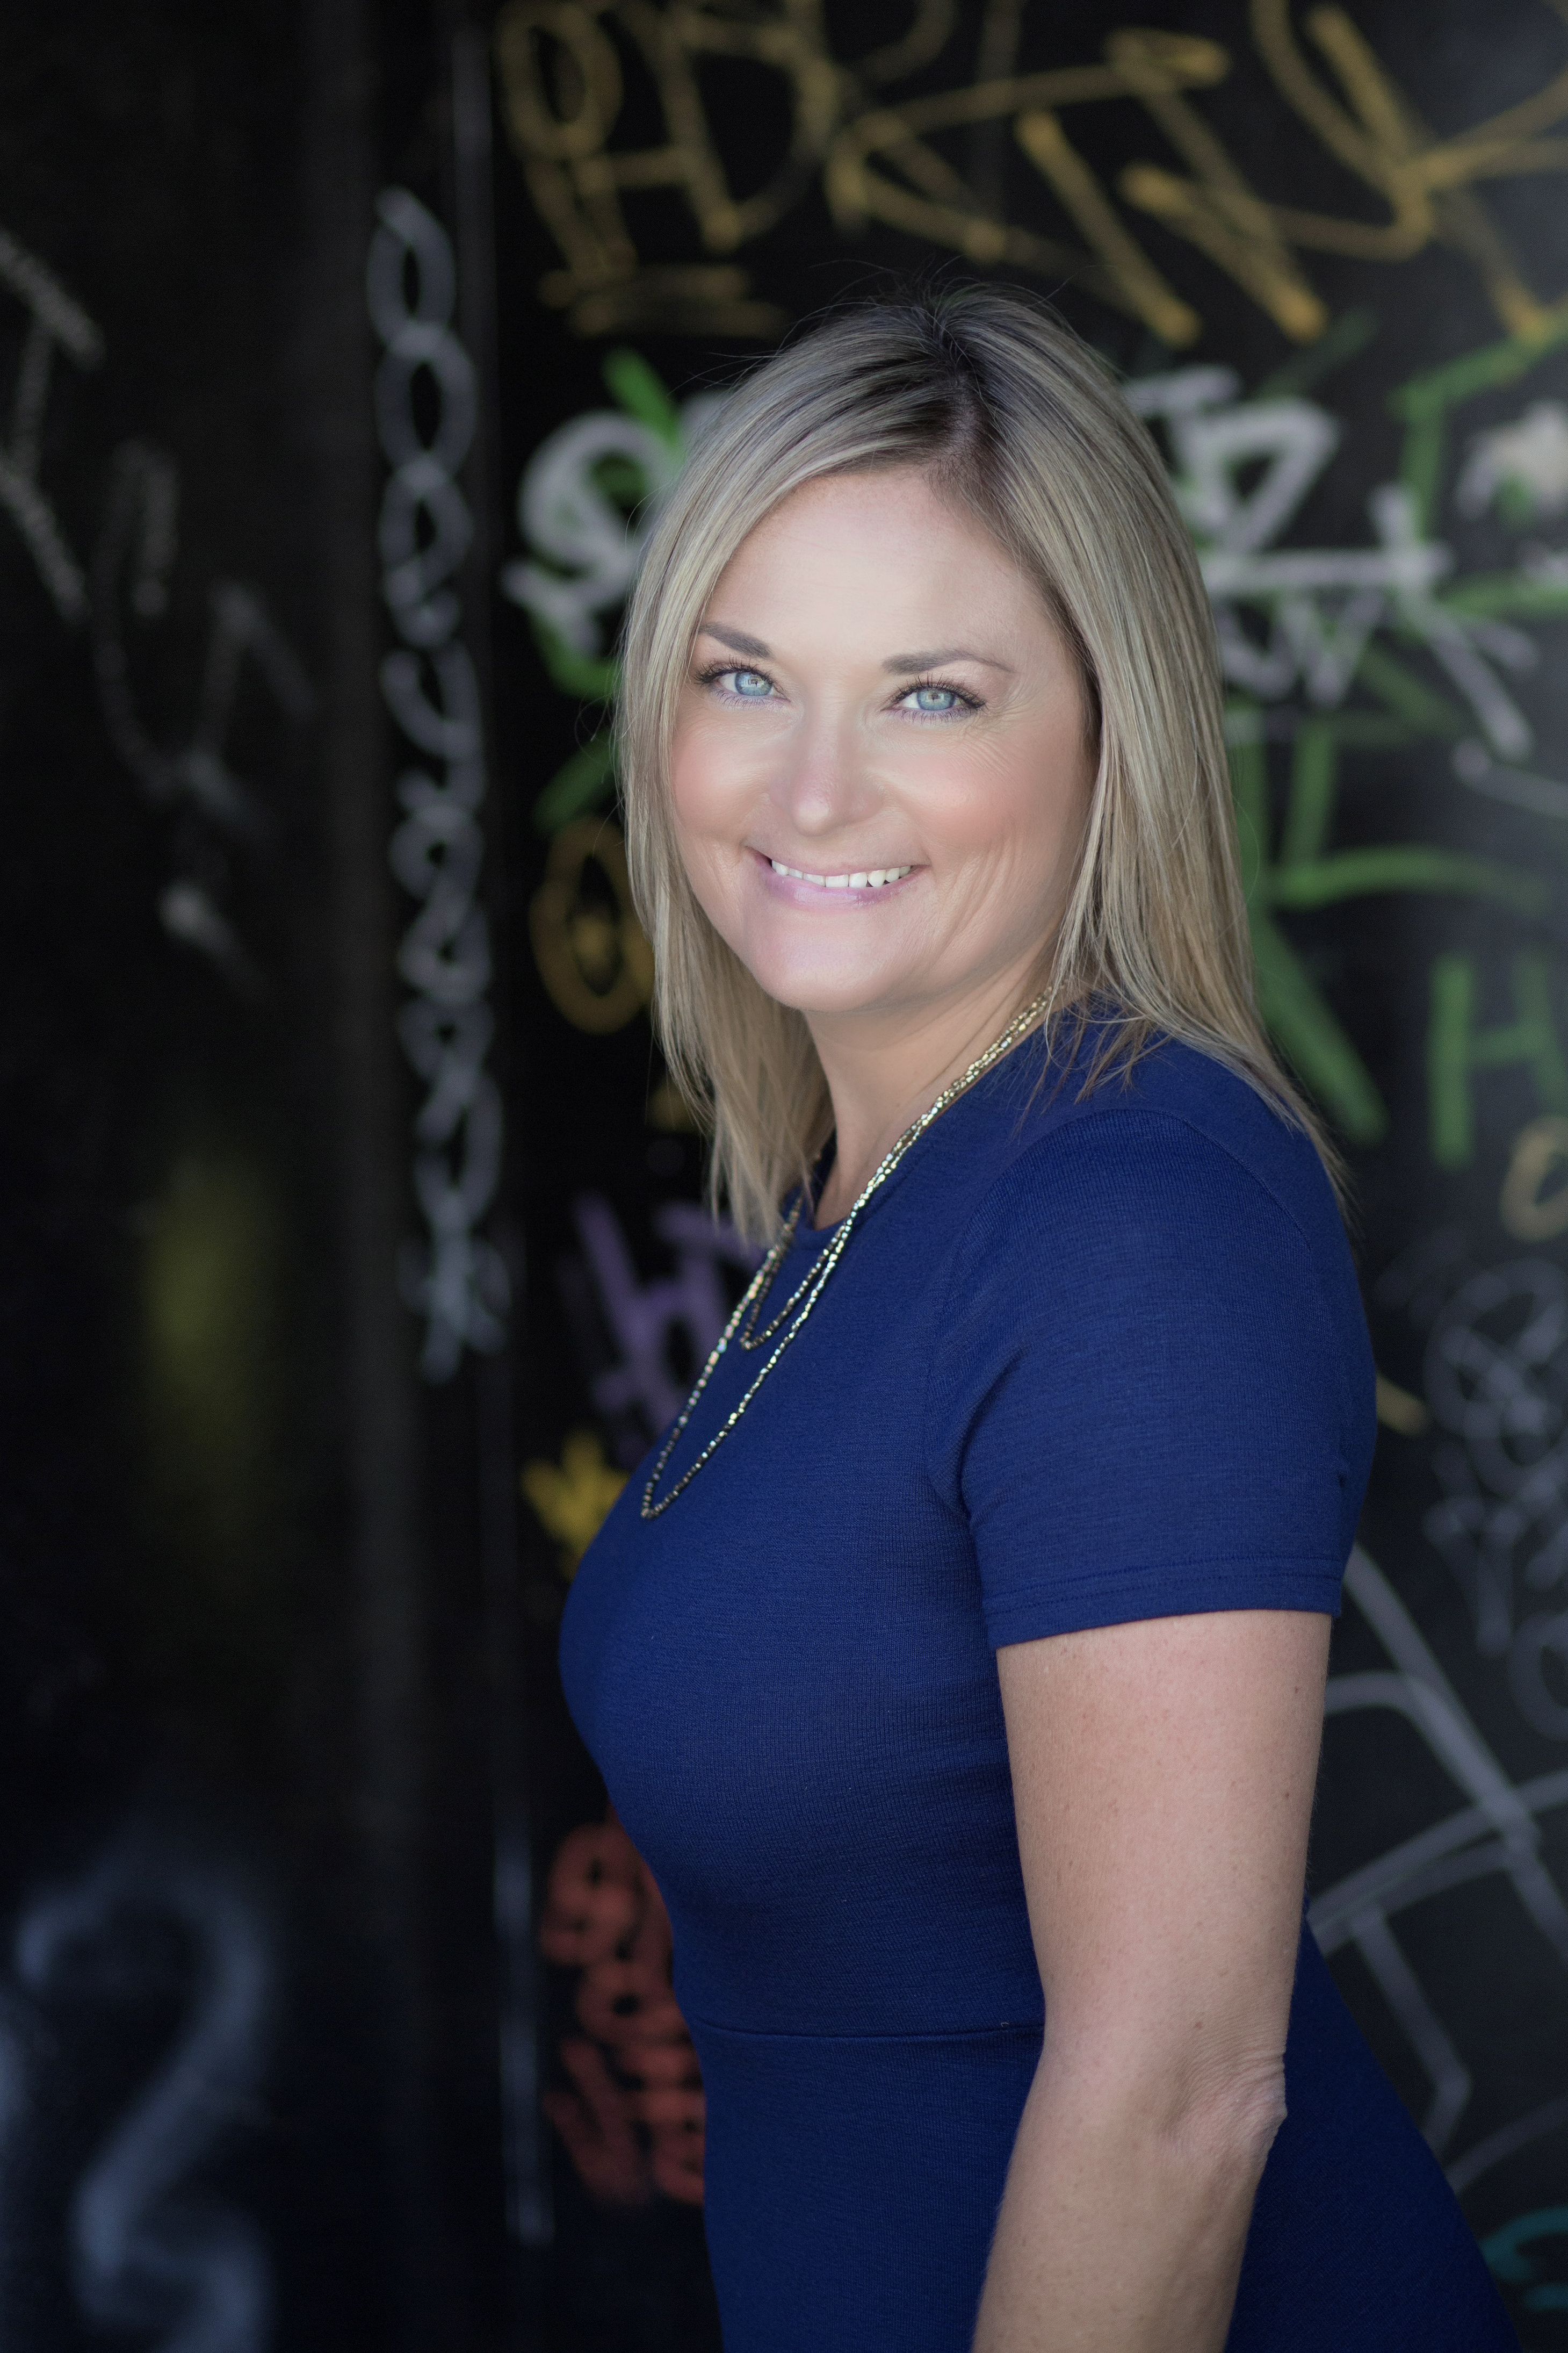 Amy Marsh is the business development manager for Carrington Mortgage Services, Wholesale Lending Division